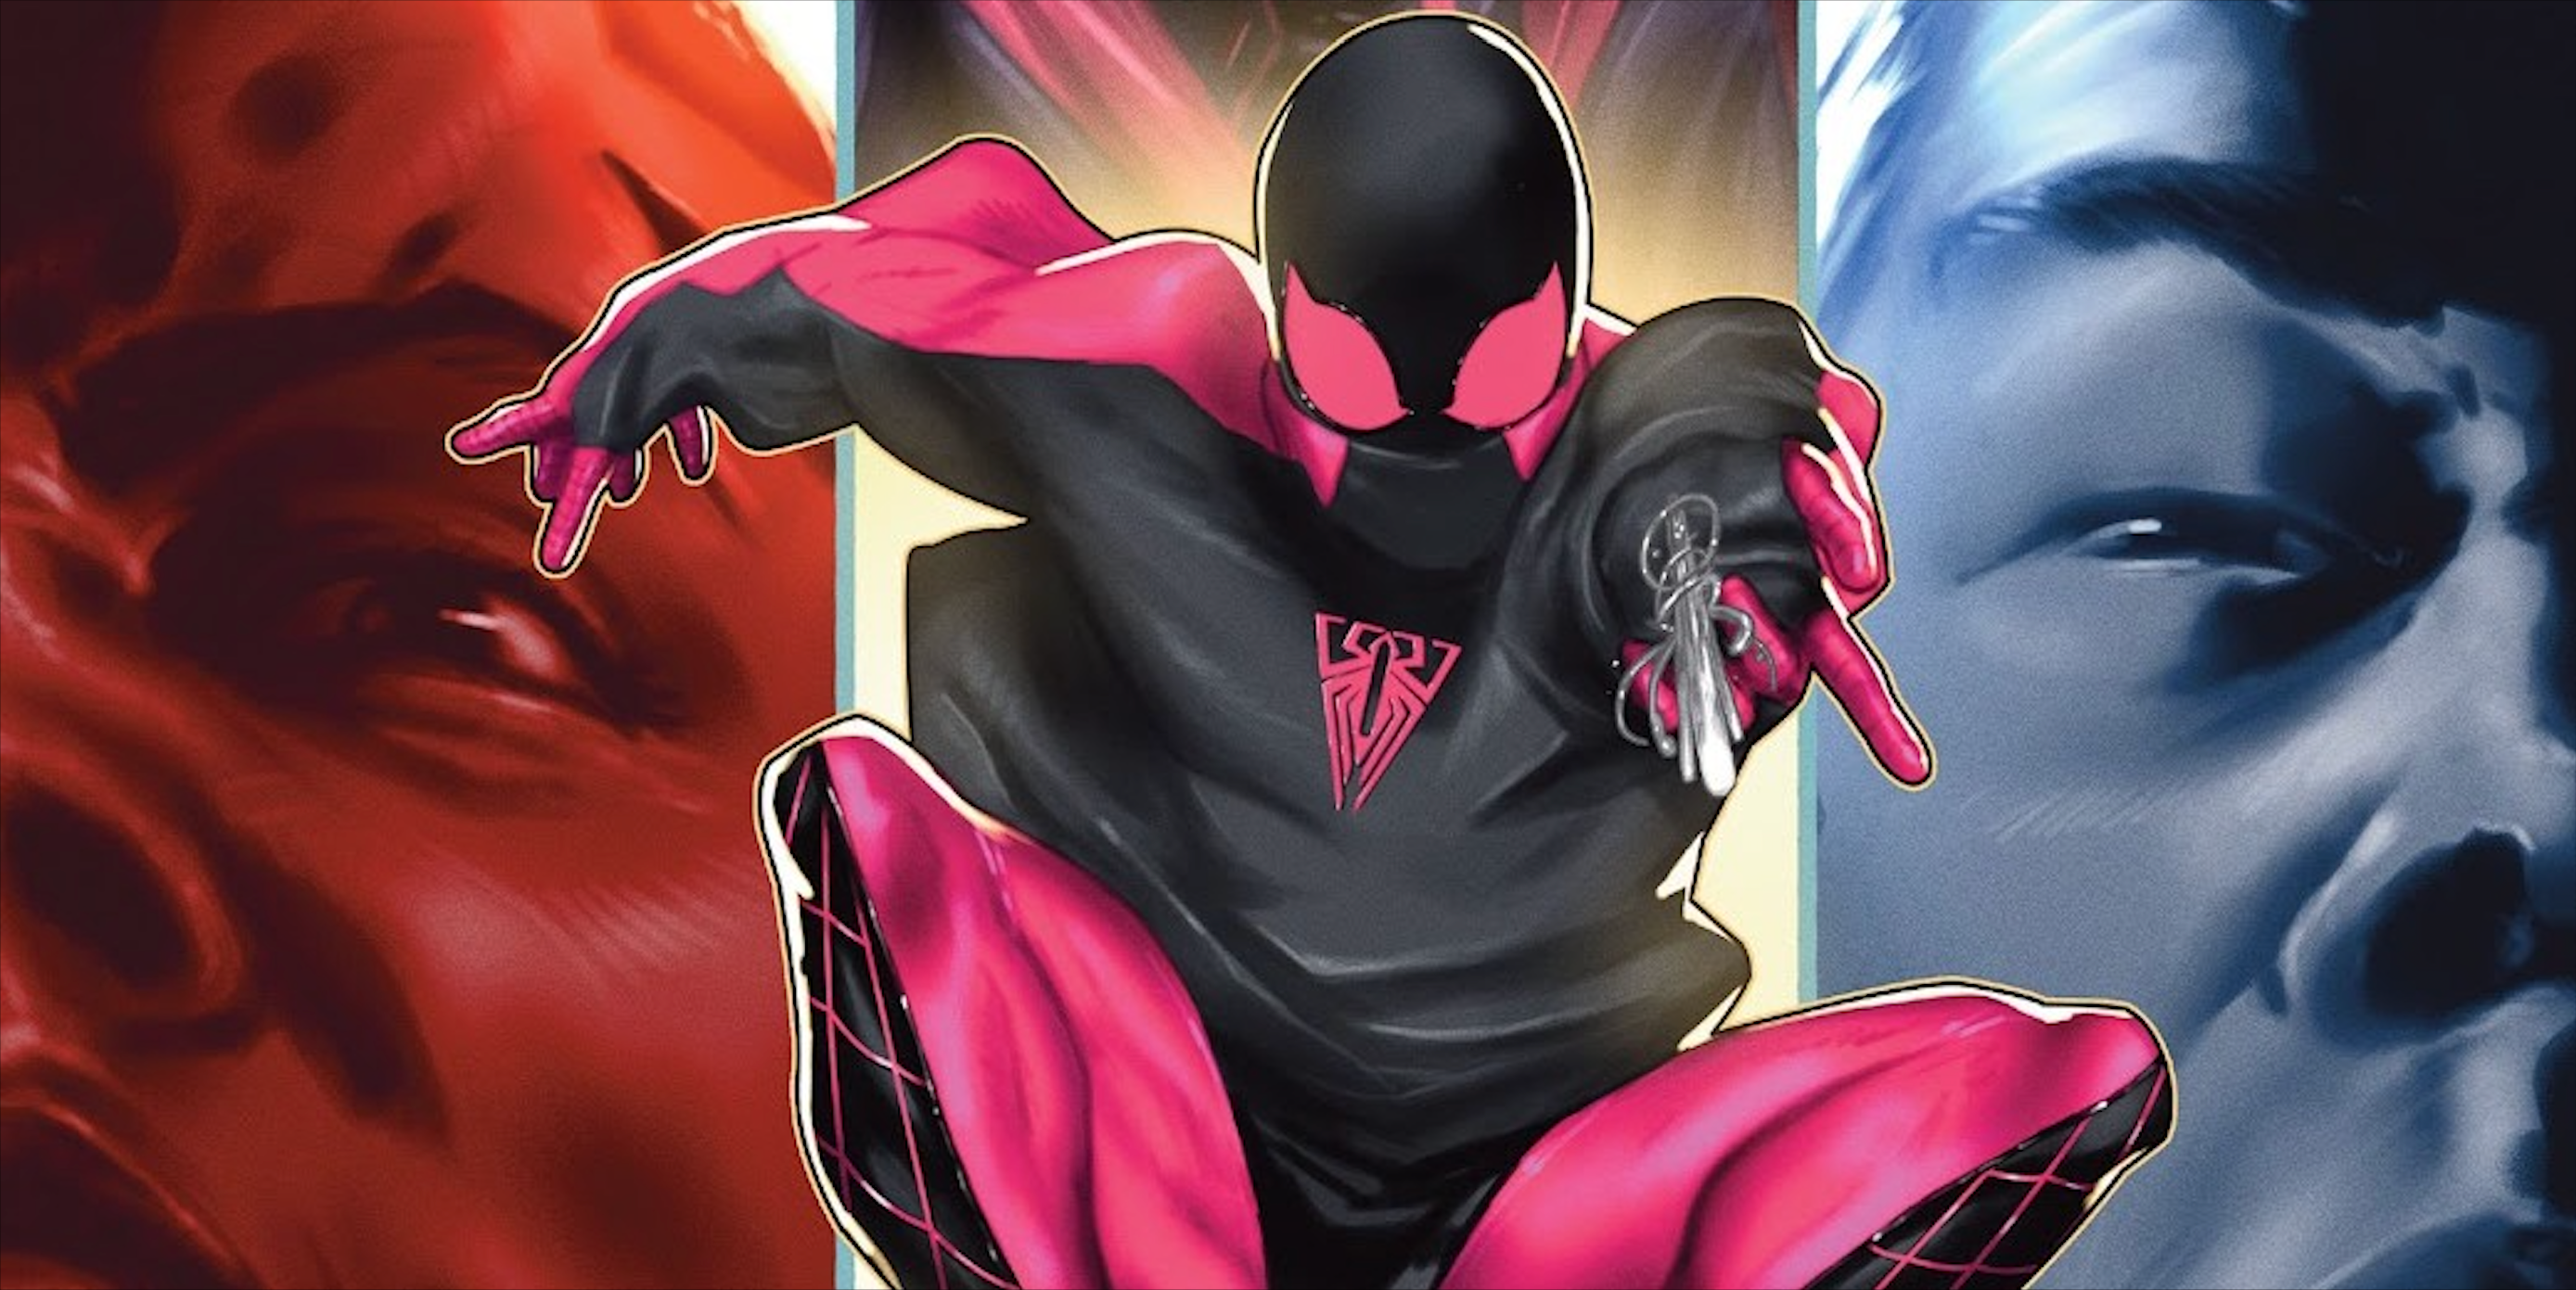 The Evil Miles Morales is Conquering New York